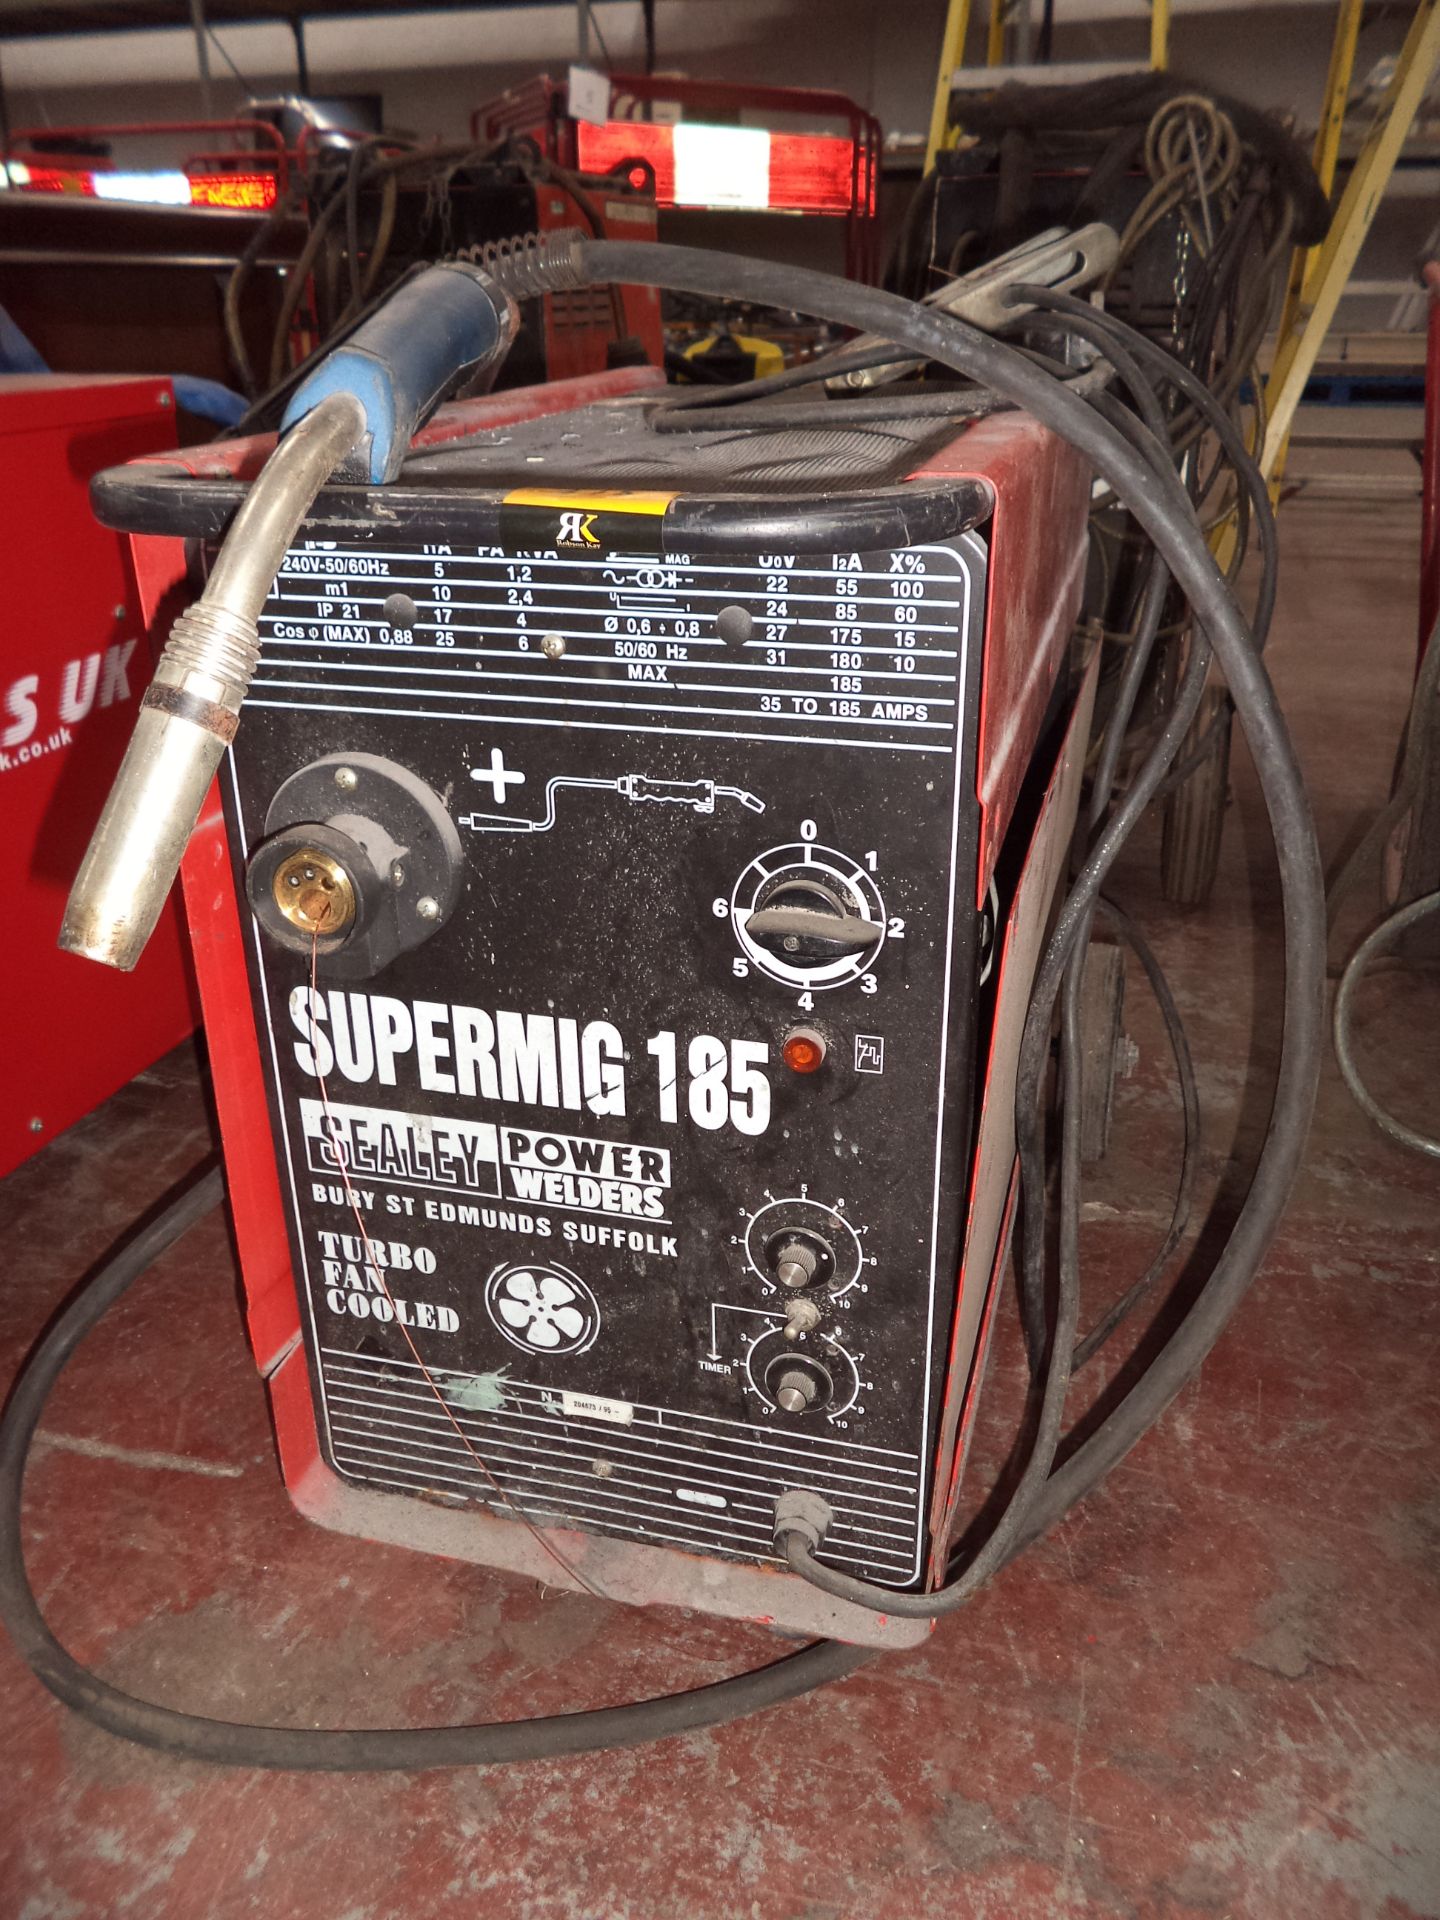 Sealey Power Welder Supermig 185 welding system IMPORTANT: Please remember goods successfully bid - Image 2 of 3